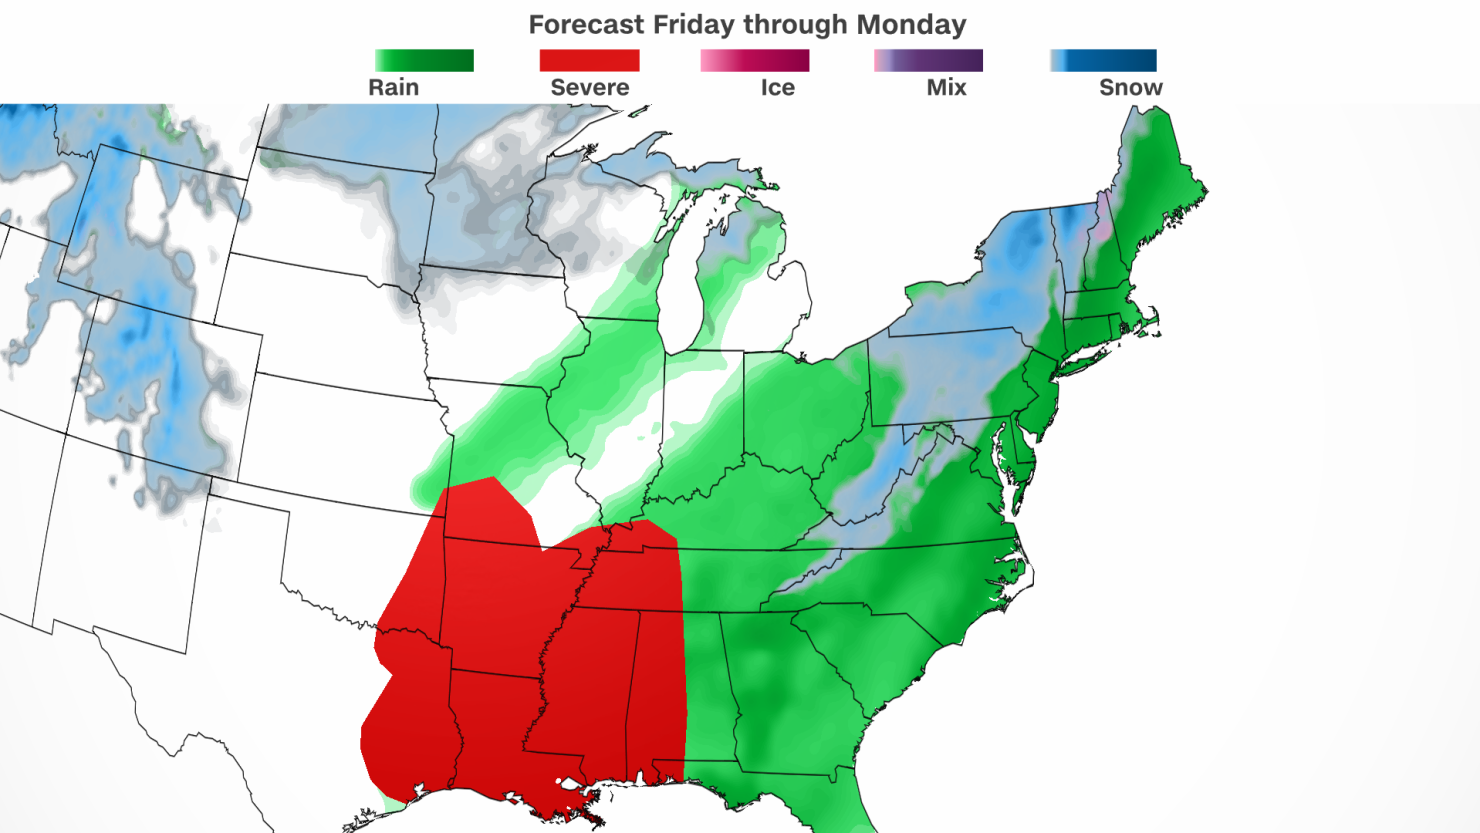 Multiple weather threats will unfold across the eastern half of the US from Friday through Monday.